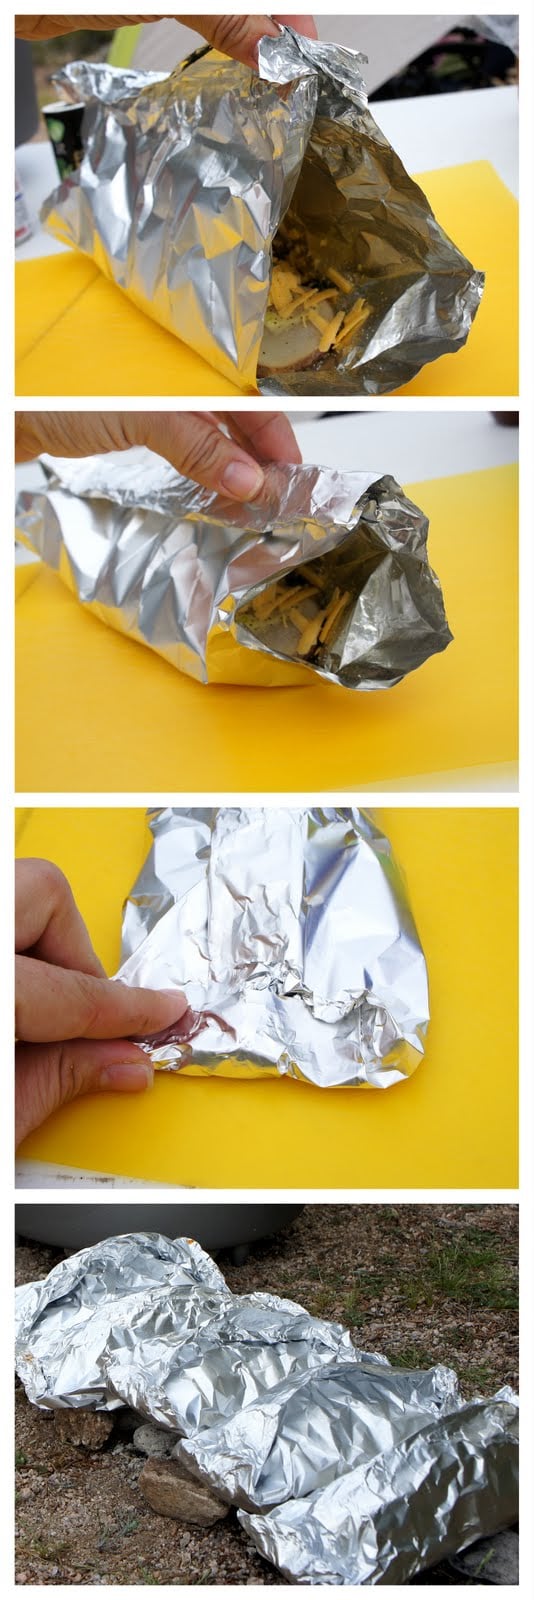 A demonstration on how to fold the tinfoil wrapped food for cooking in the fire